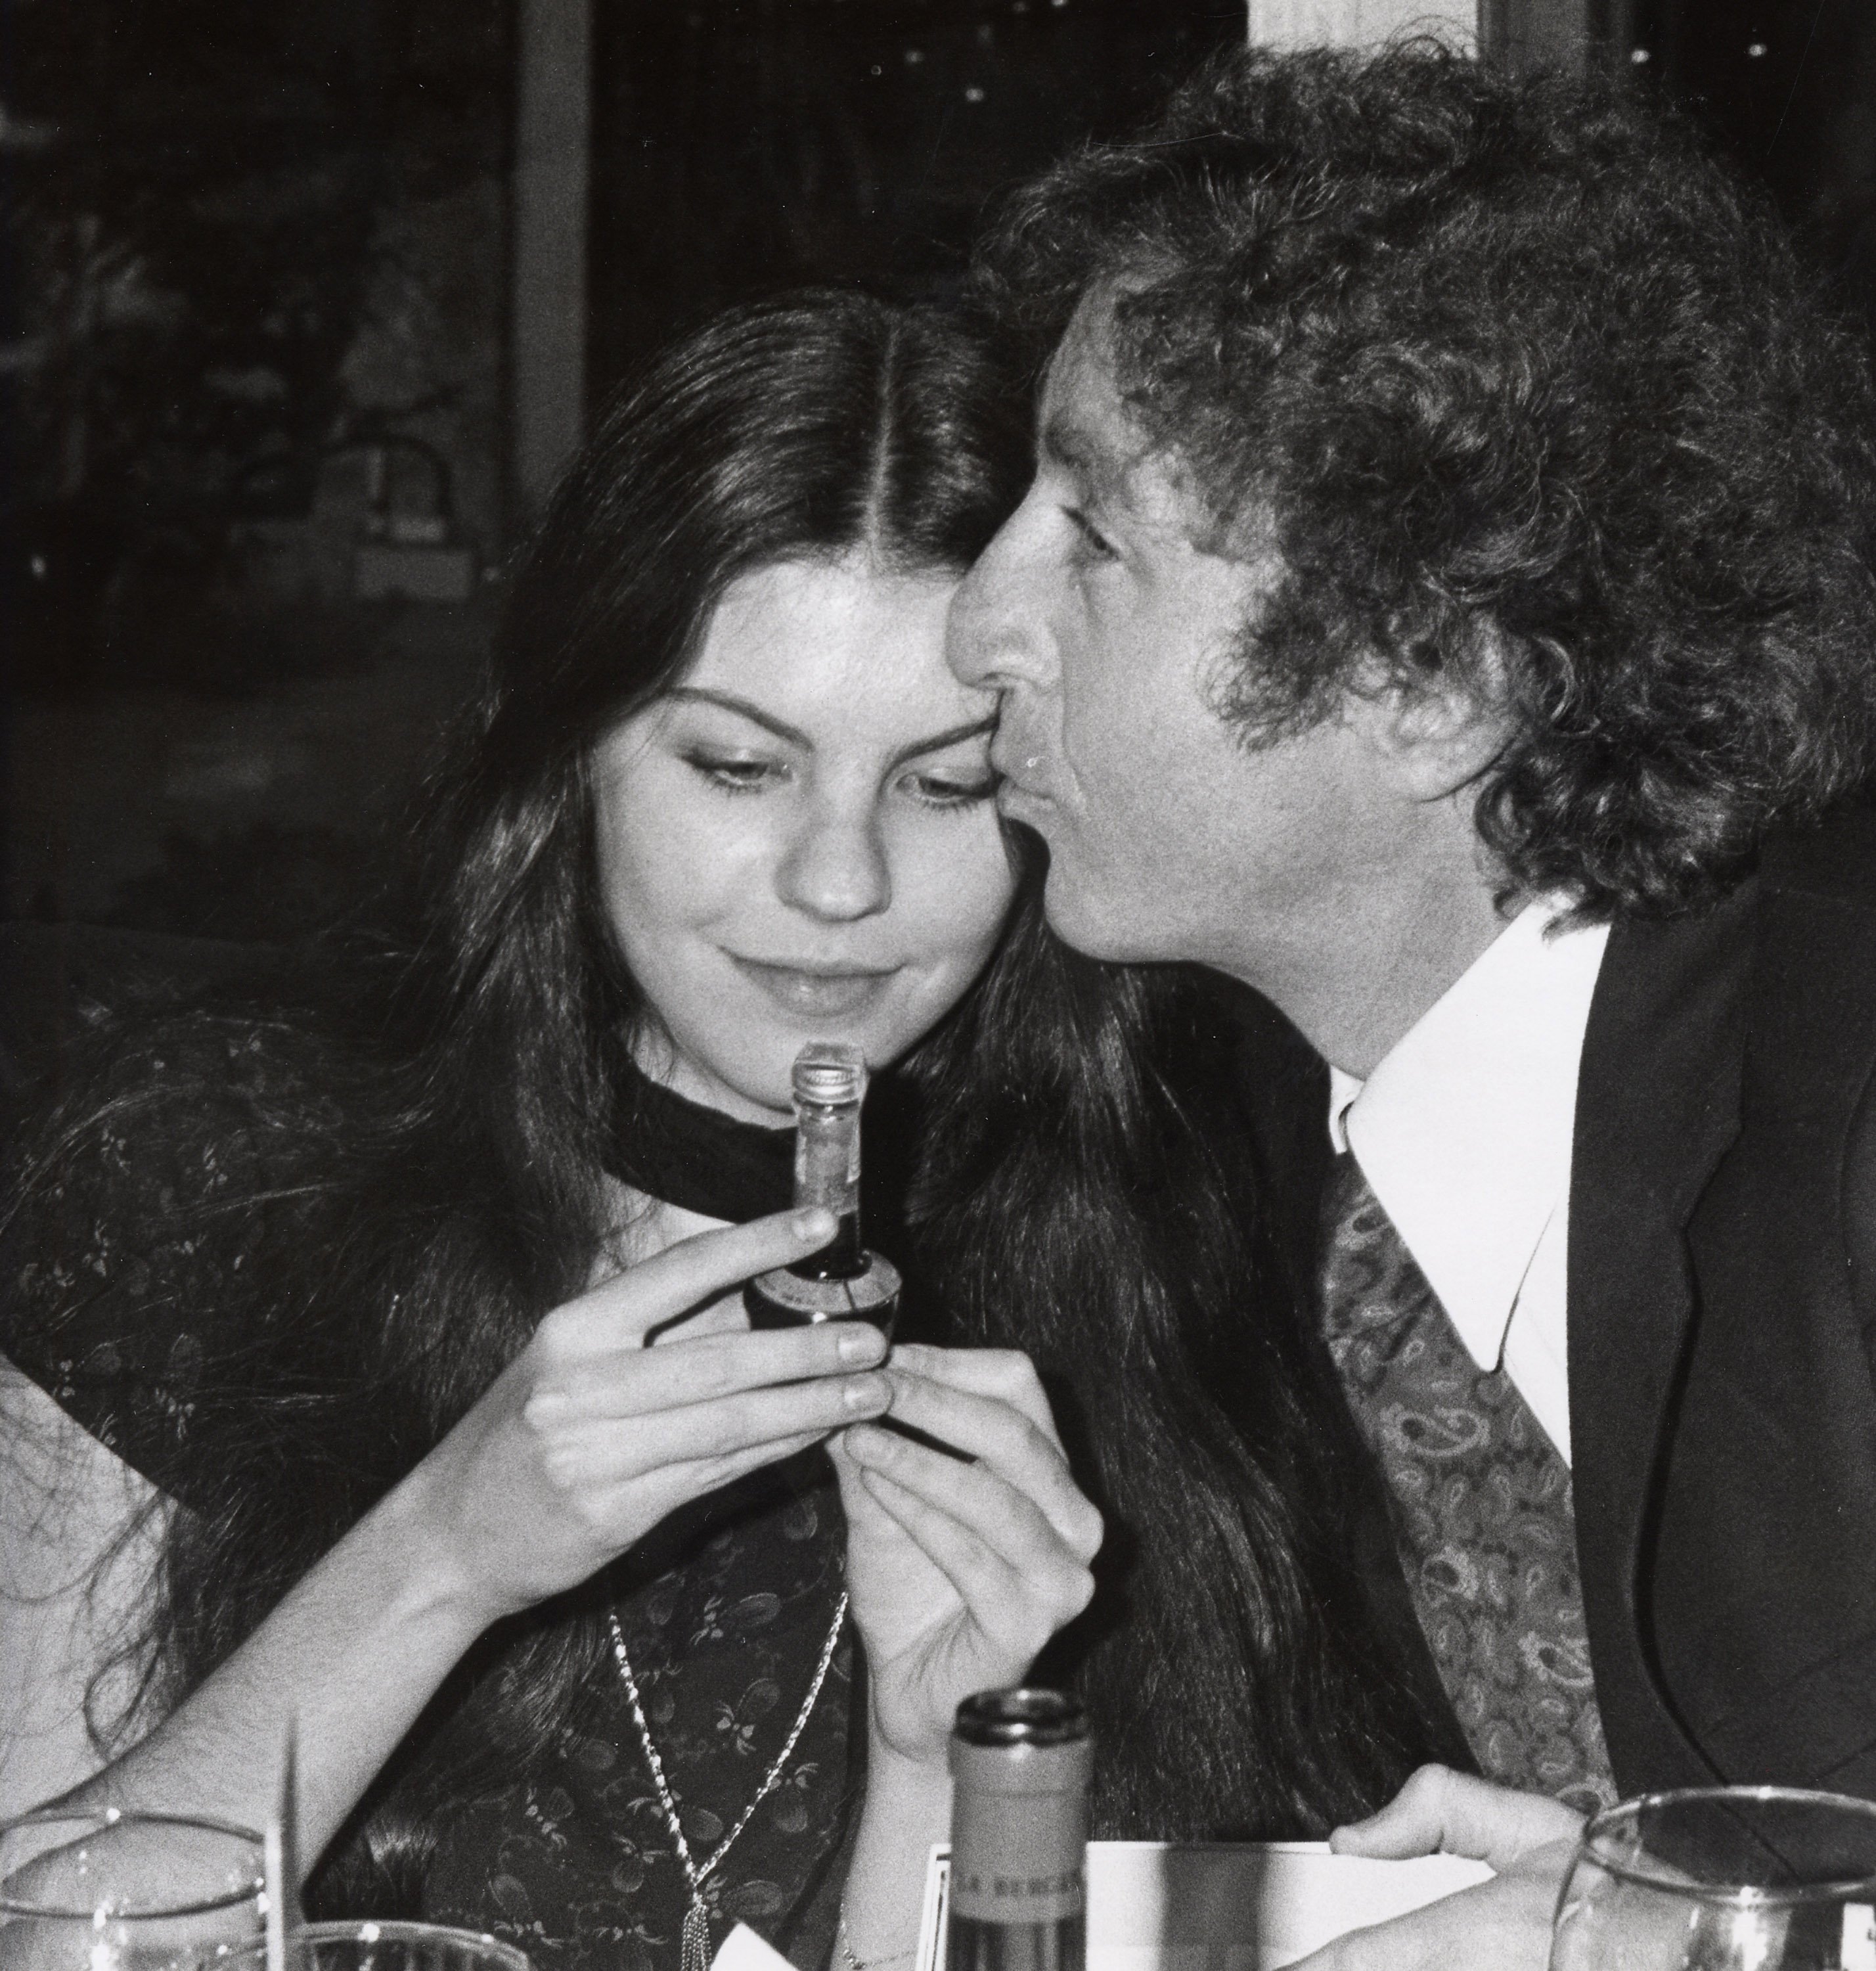 Katherine Wilder Gene Wilder attend the "Silver Streak" Premiere Party on December 7, 1976 at Tavern on the Green in New York City, New York. | Source: Getty Images